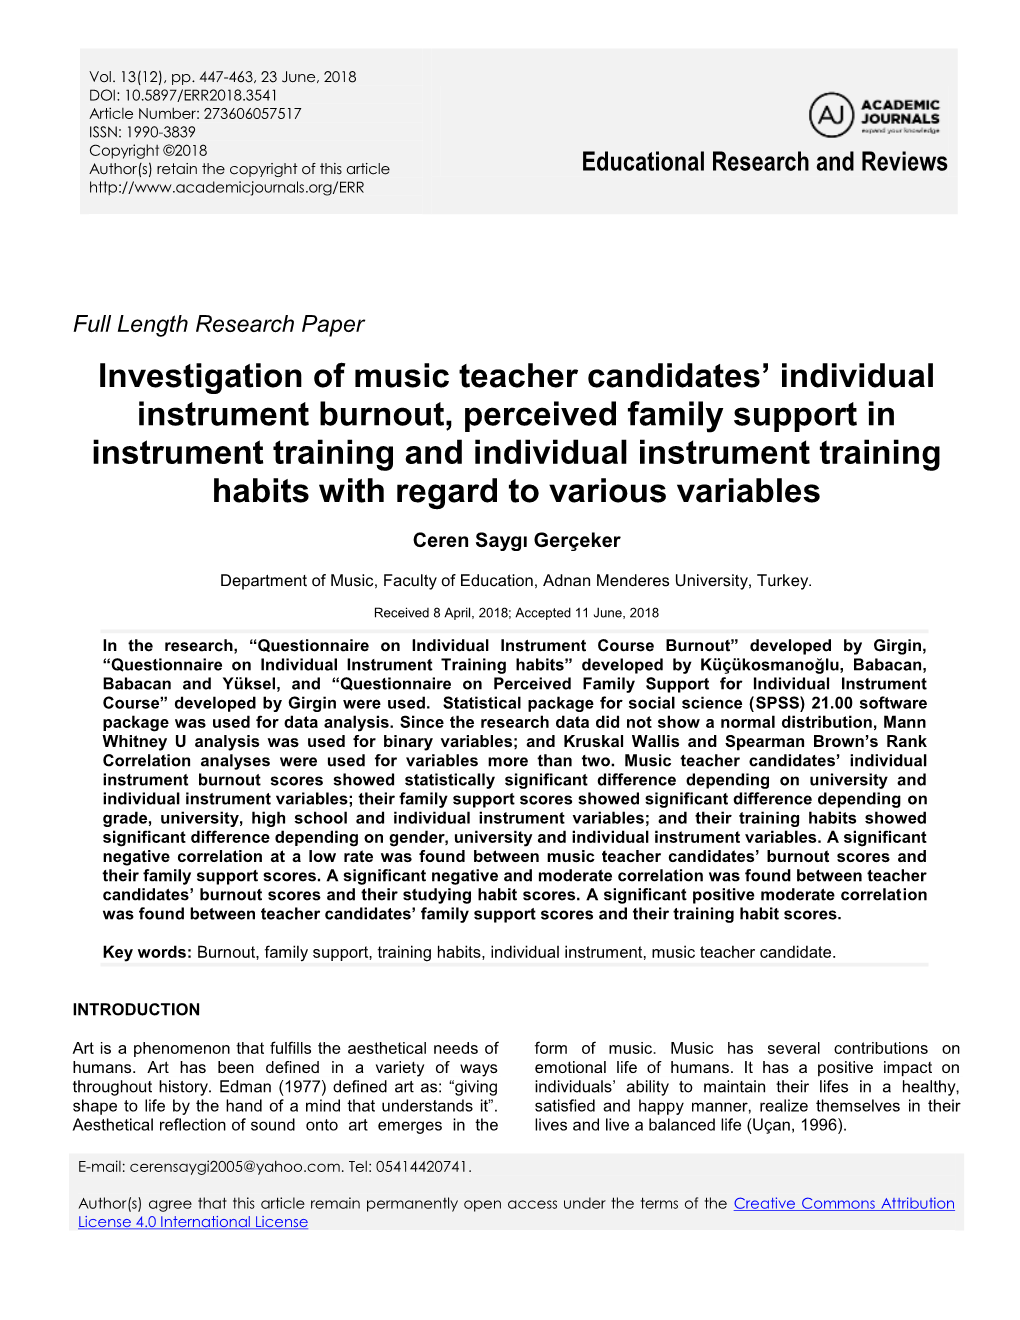 Investigation of Music Teacher Candidates' Individual Instrument Burnout, Perceived Family Support in Instrument Training